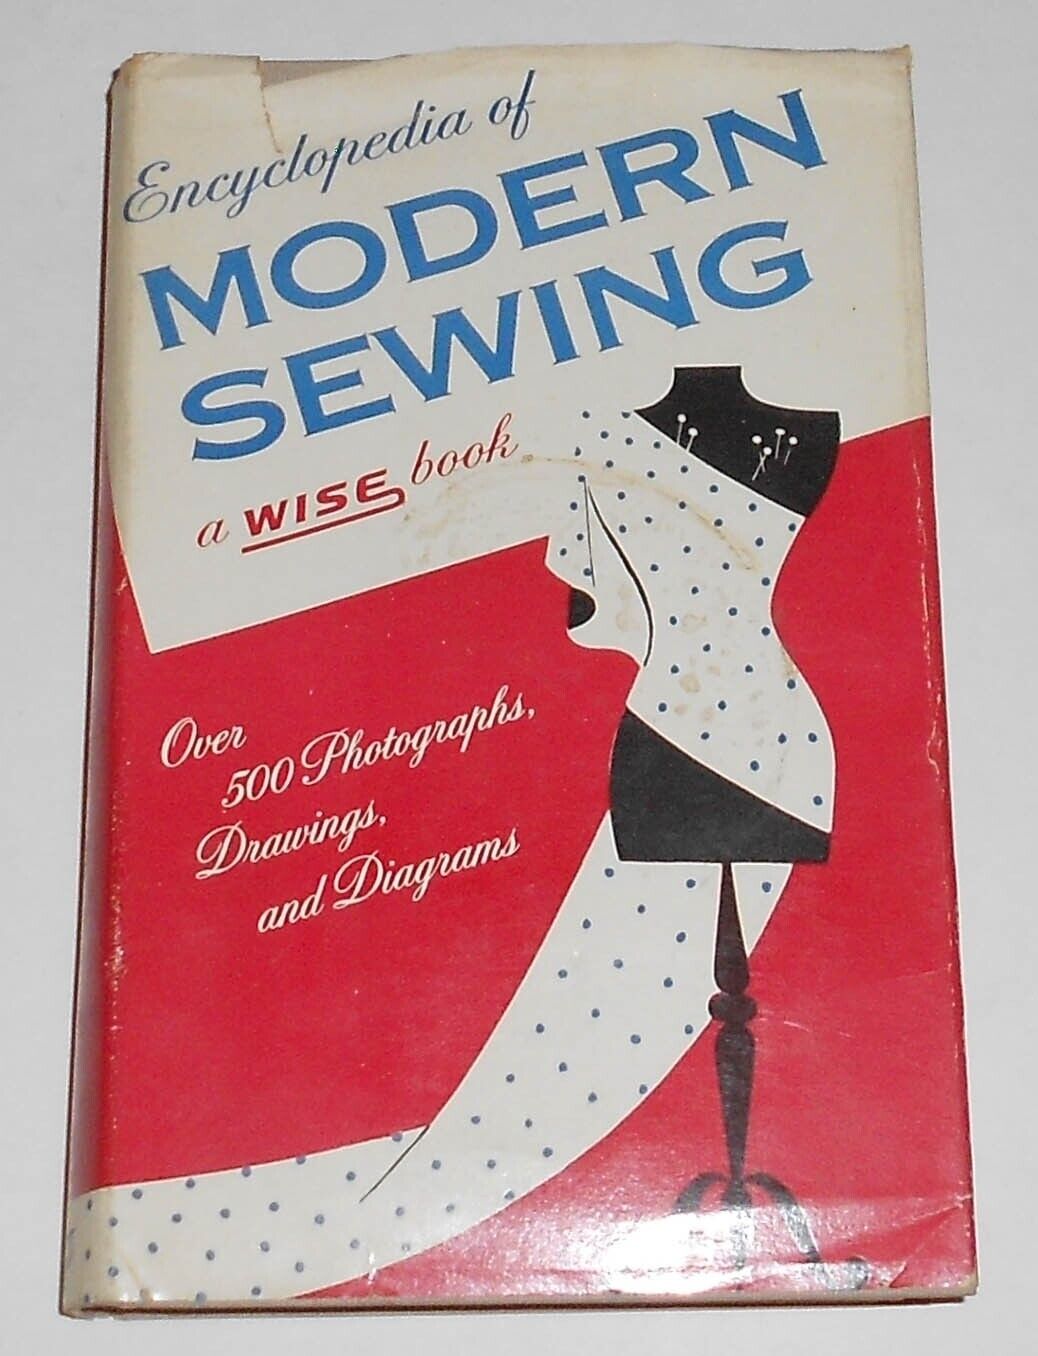 Encyclopedia of MODERN SEWING 1955 Wm. H. Wise & Co. HBwDJ VG+ - FAST SHIPPING